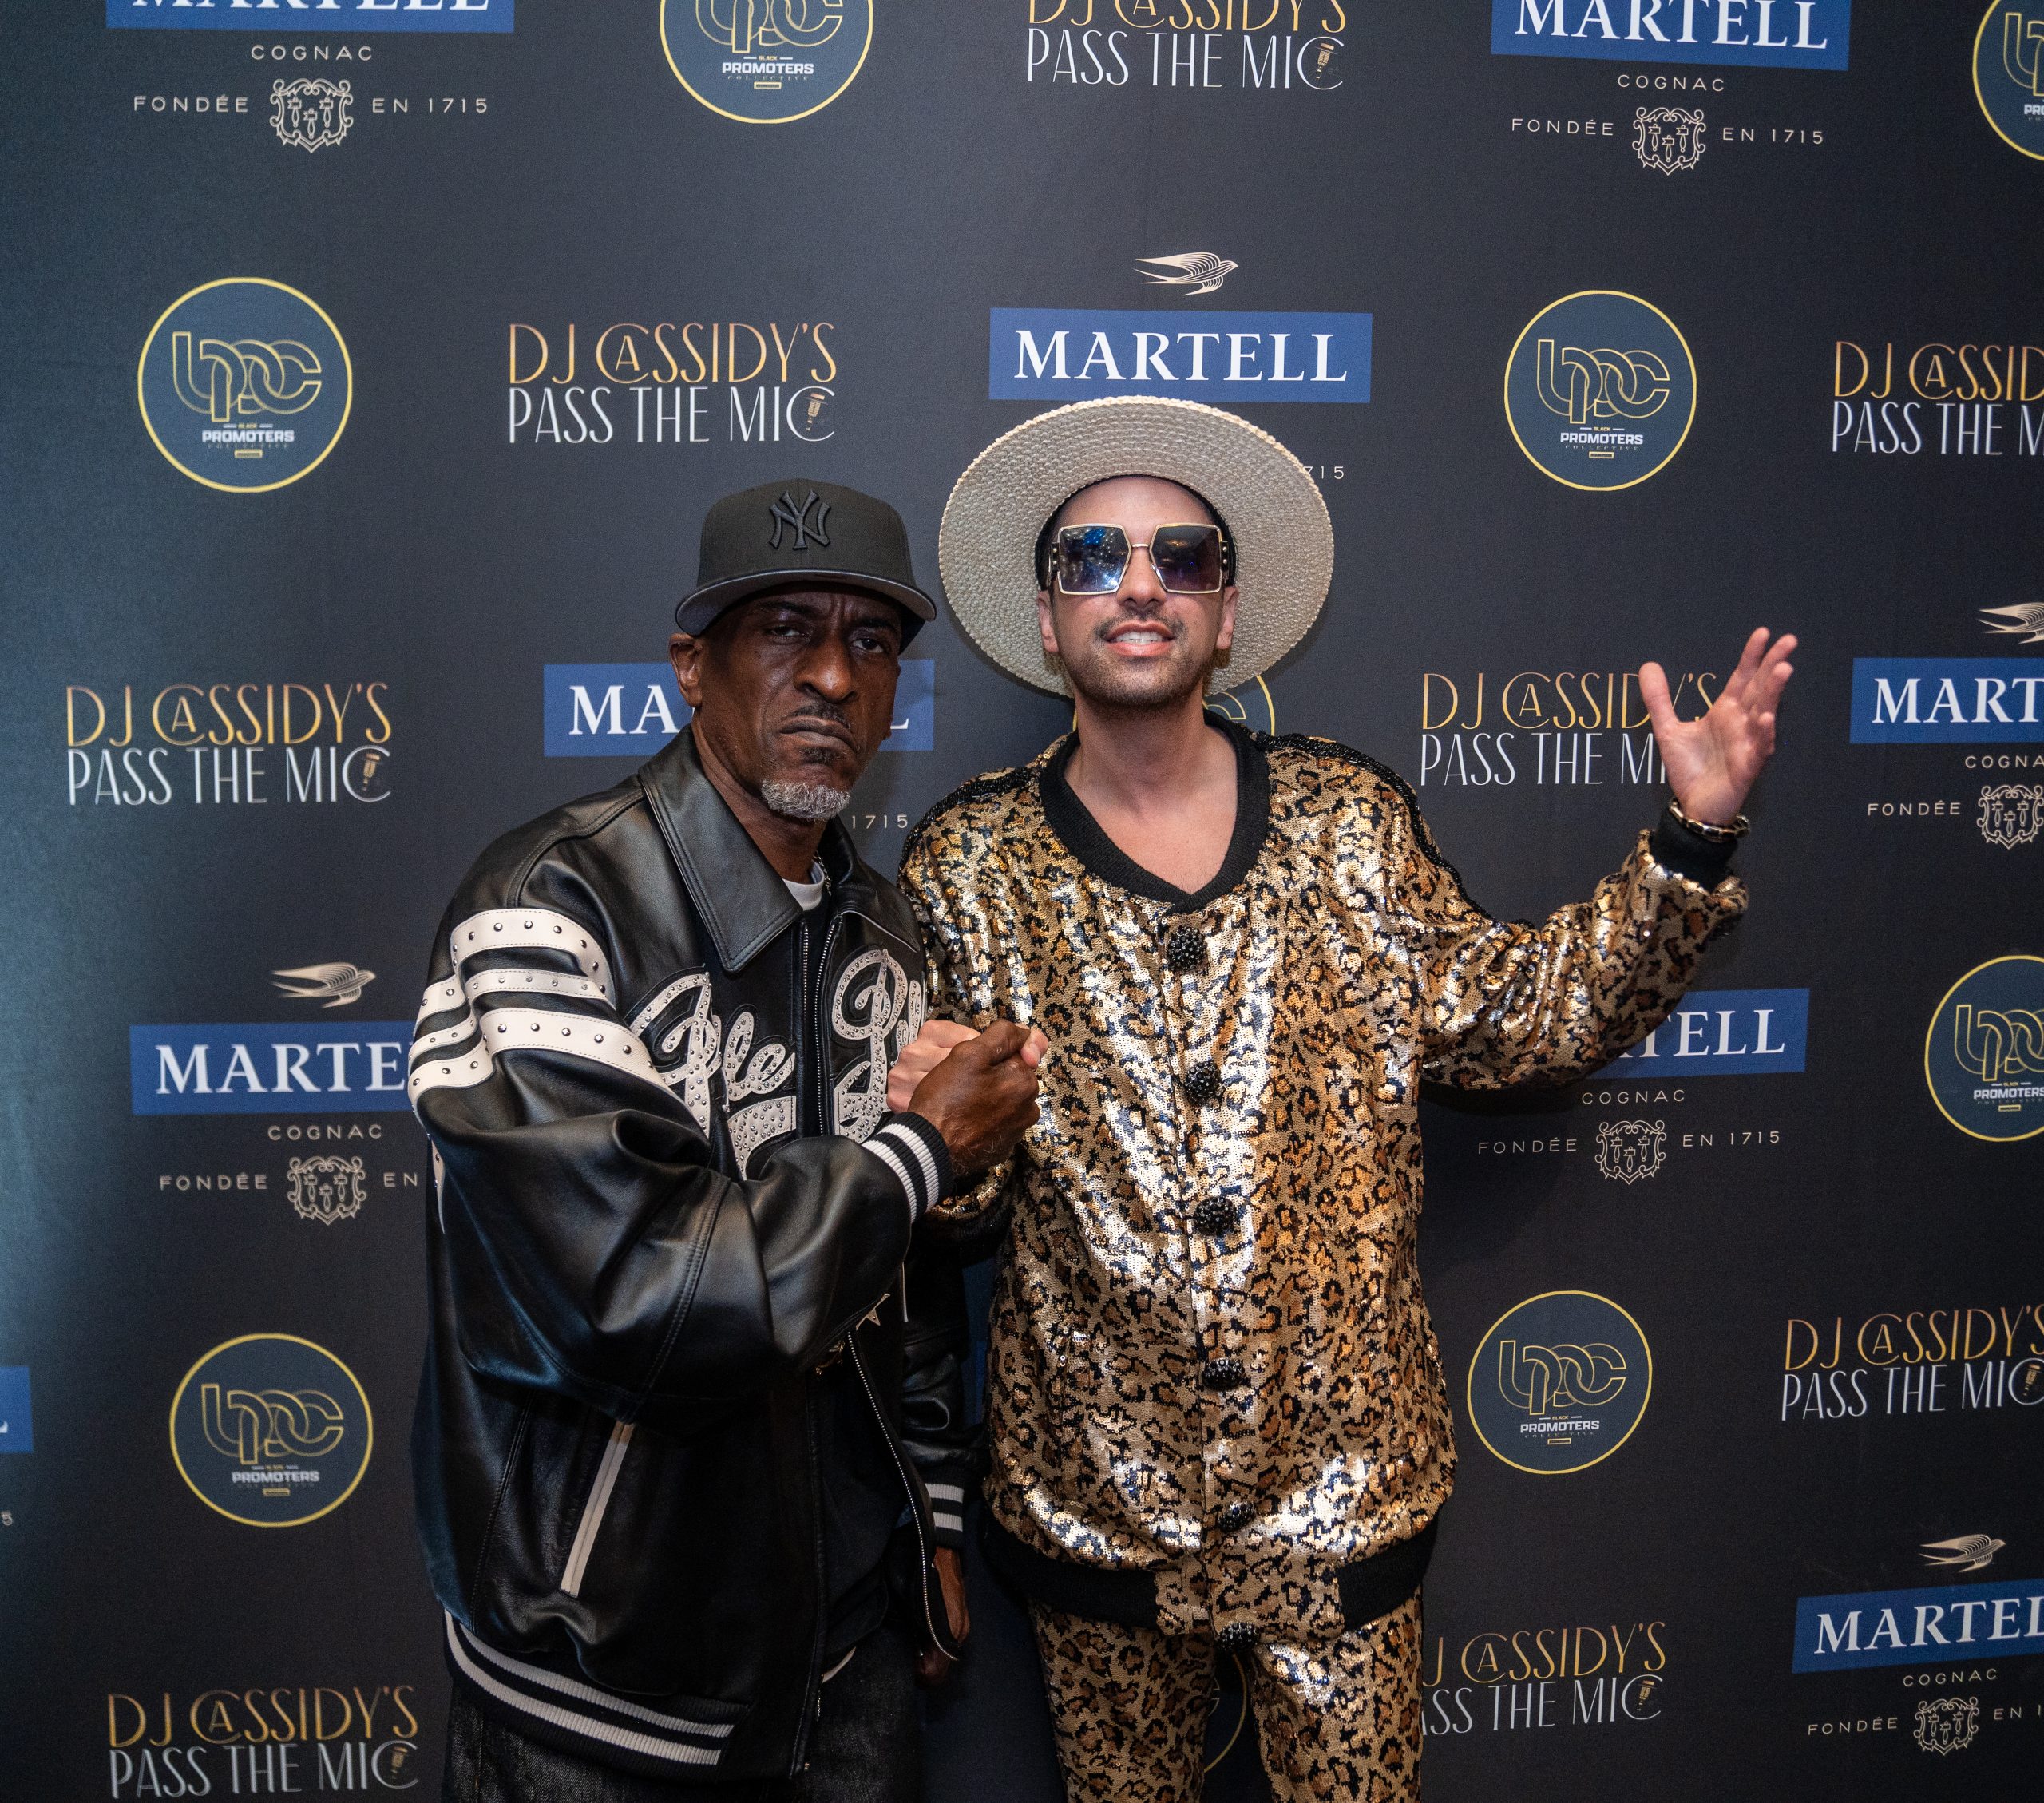 Rakim + DJ Cassidy - Martell Cognac, The Black Promoters Collective, and Power 105.1 present DJ Cassidy's Pass The Mic LIVE at Radio City Music Hall in NYC